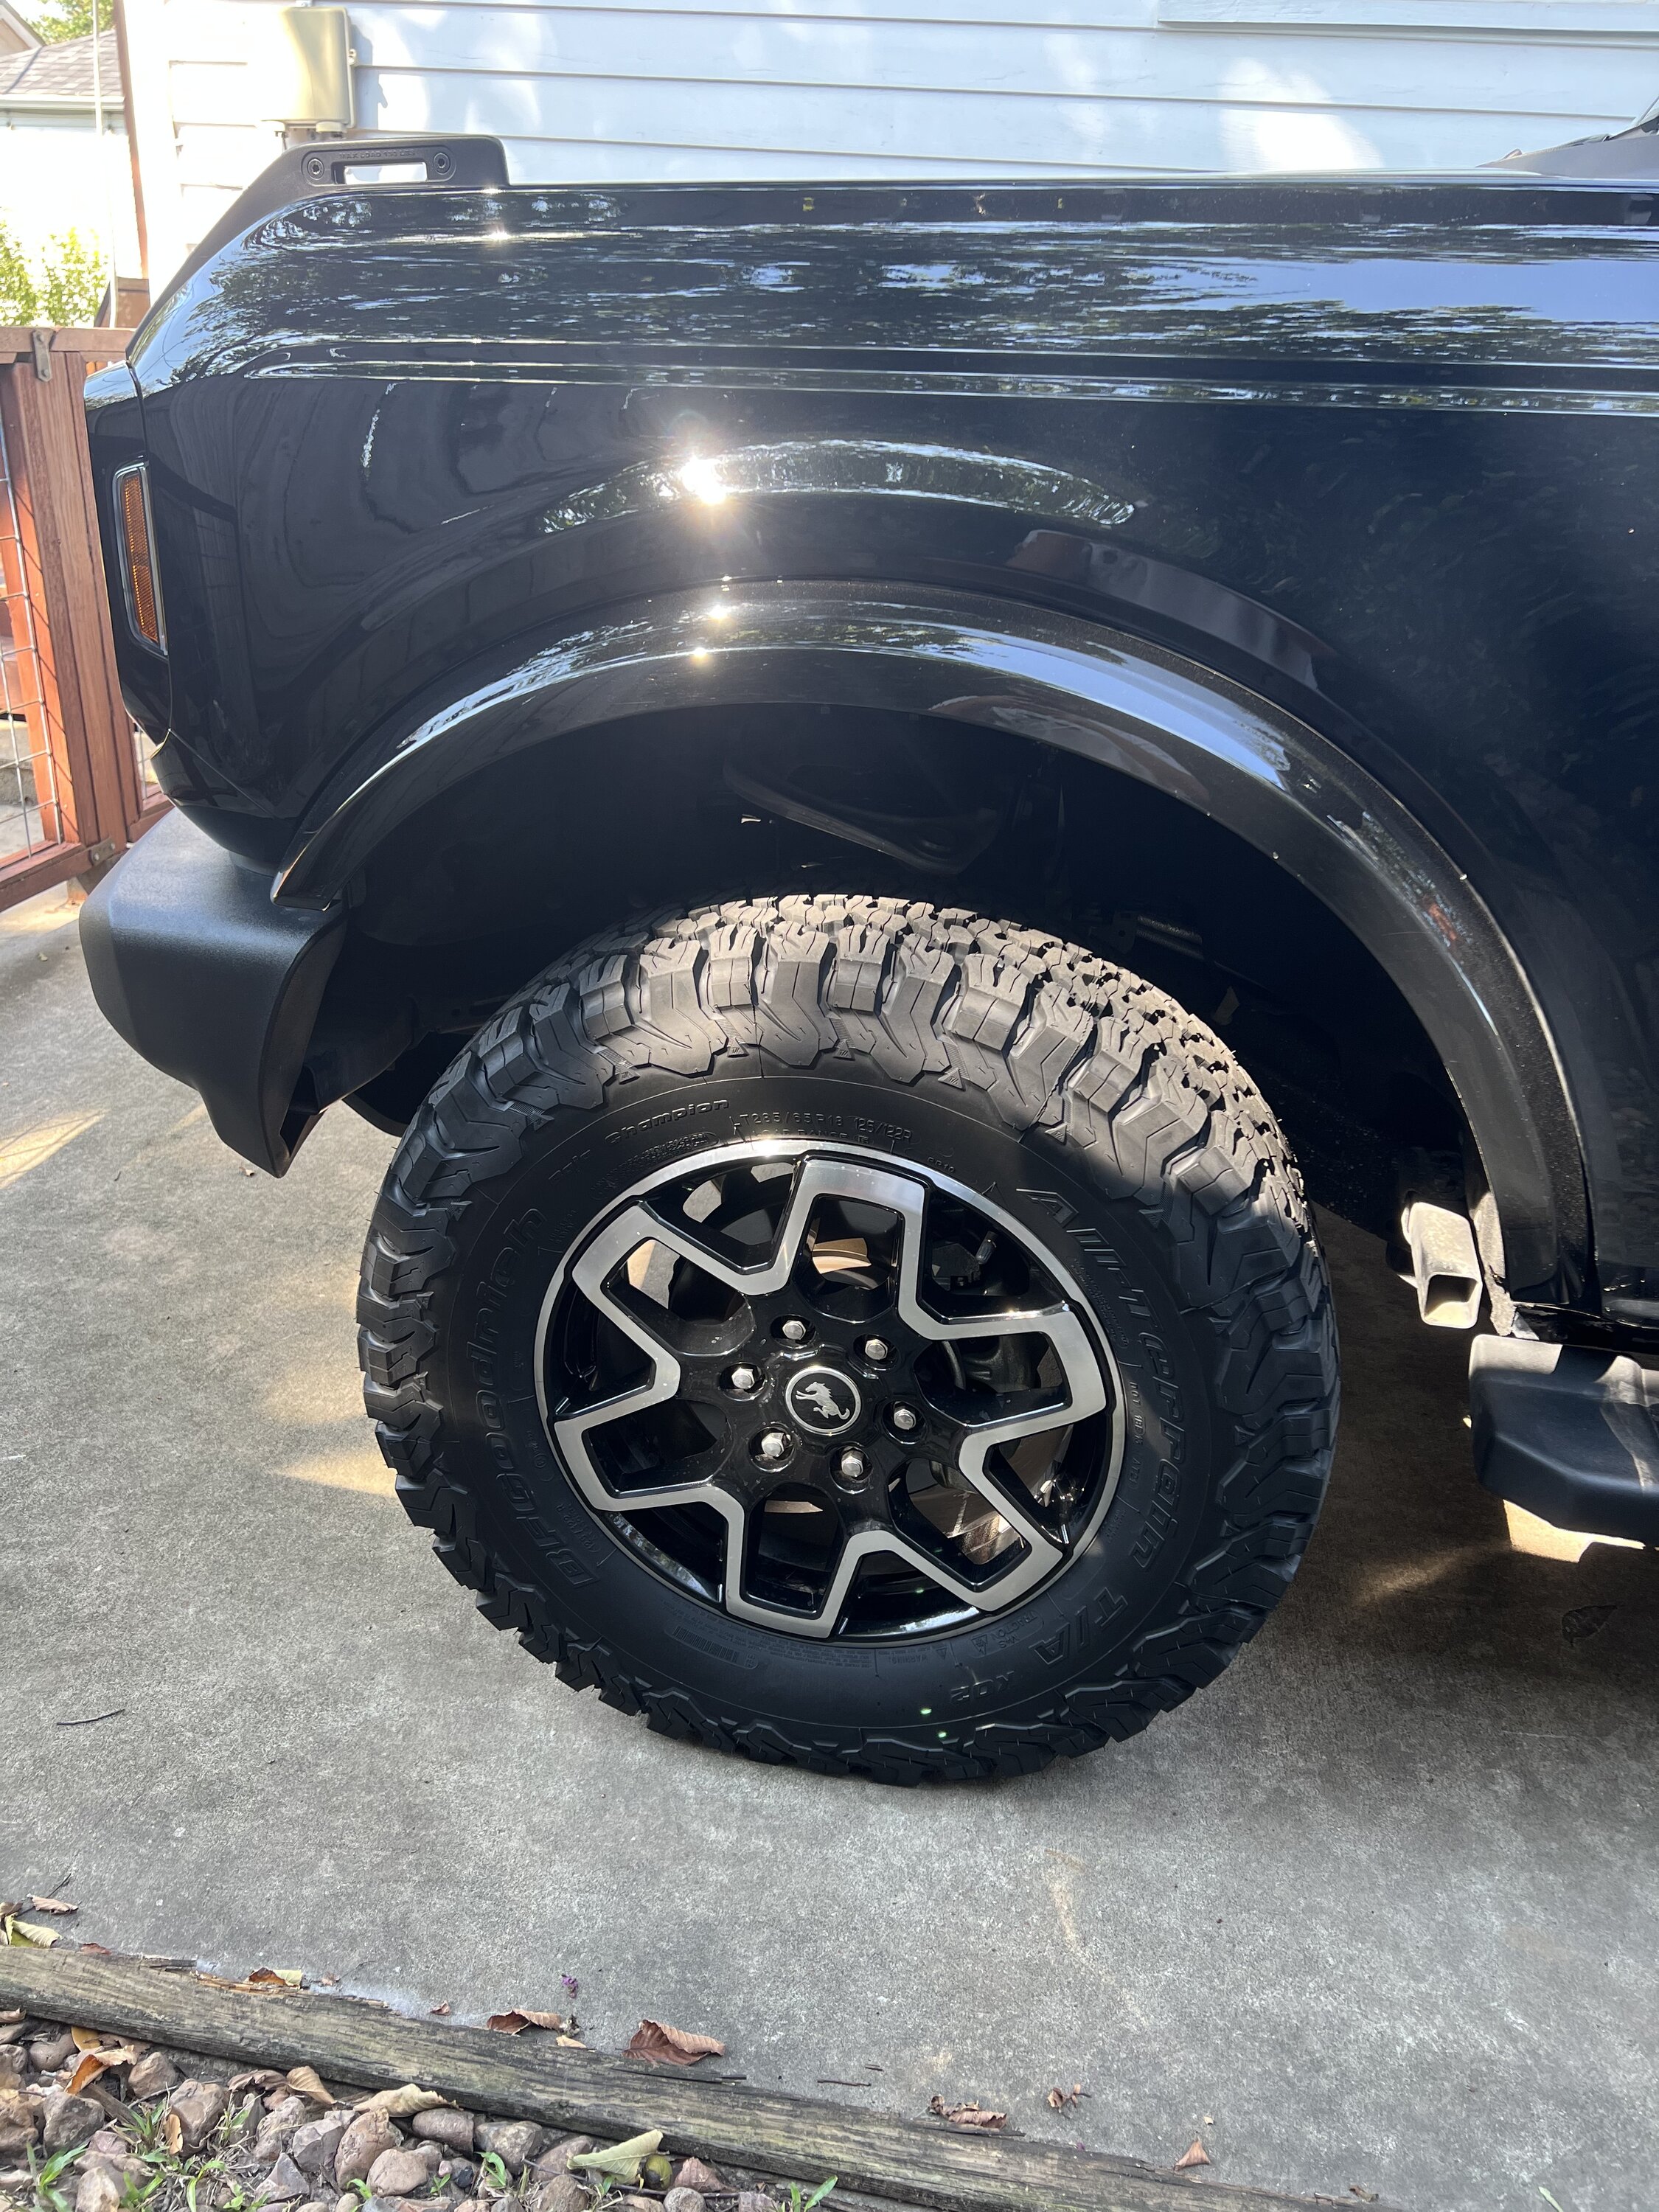 Ford Bronco Tires and Wheels. Educate Me. E31568A9-A3A4-468D-AC18-816BE838484C